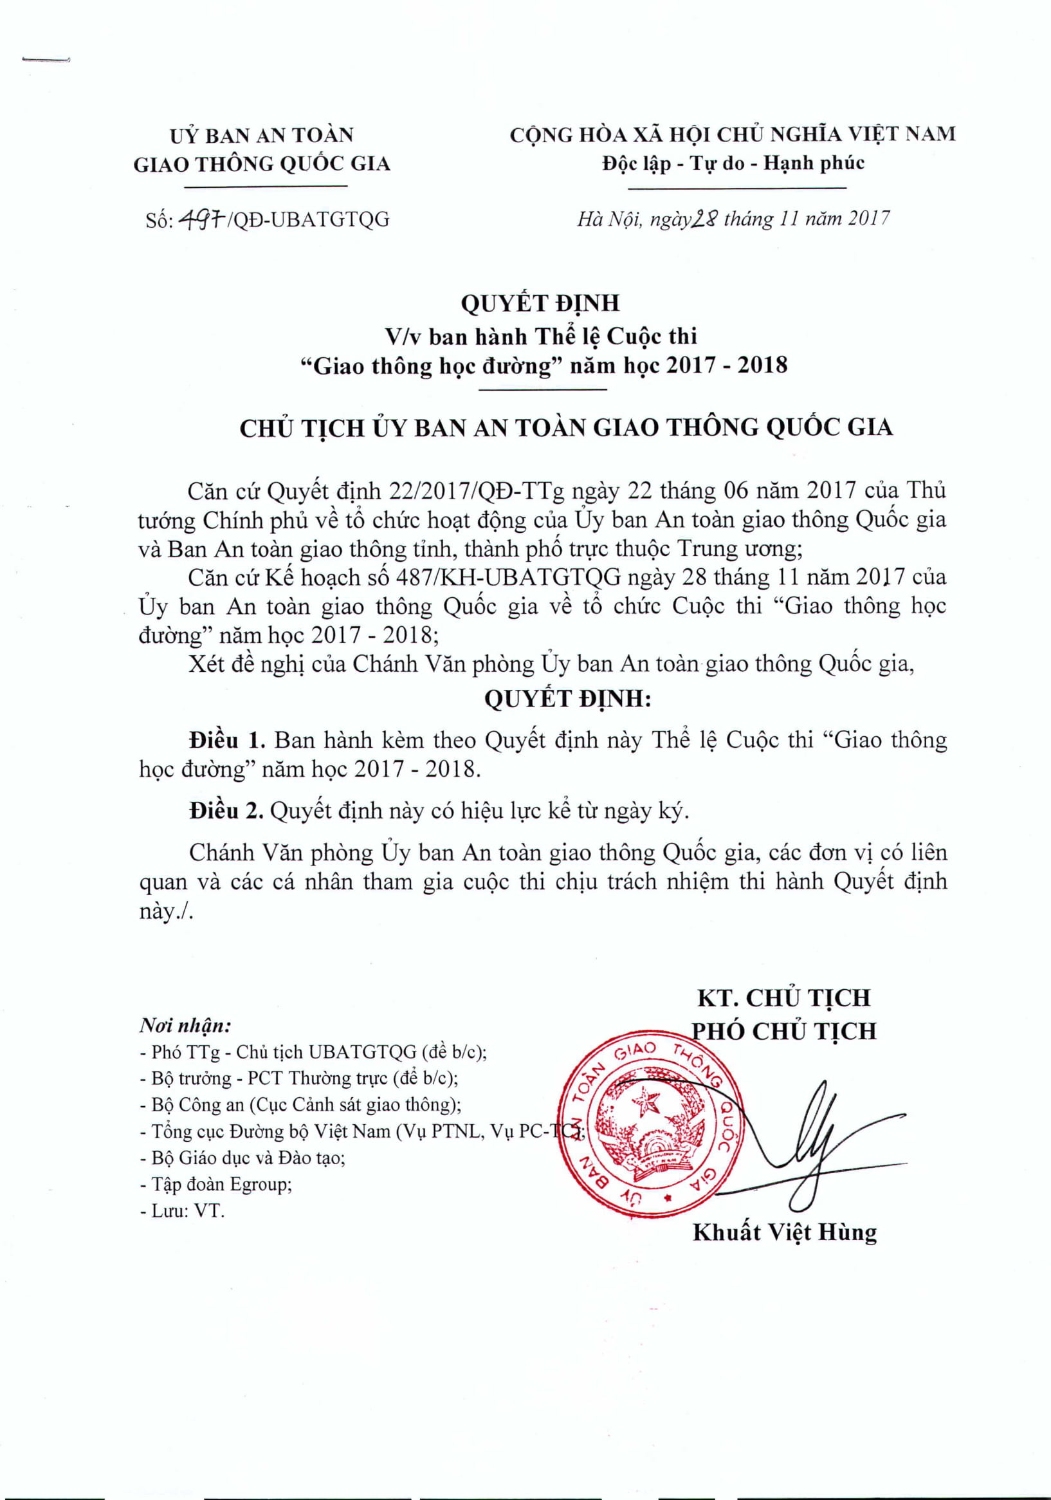 The le giao thong hoc duong 1